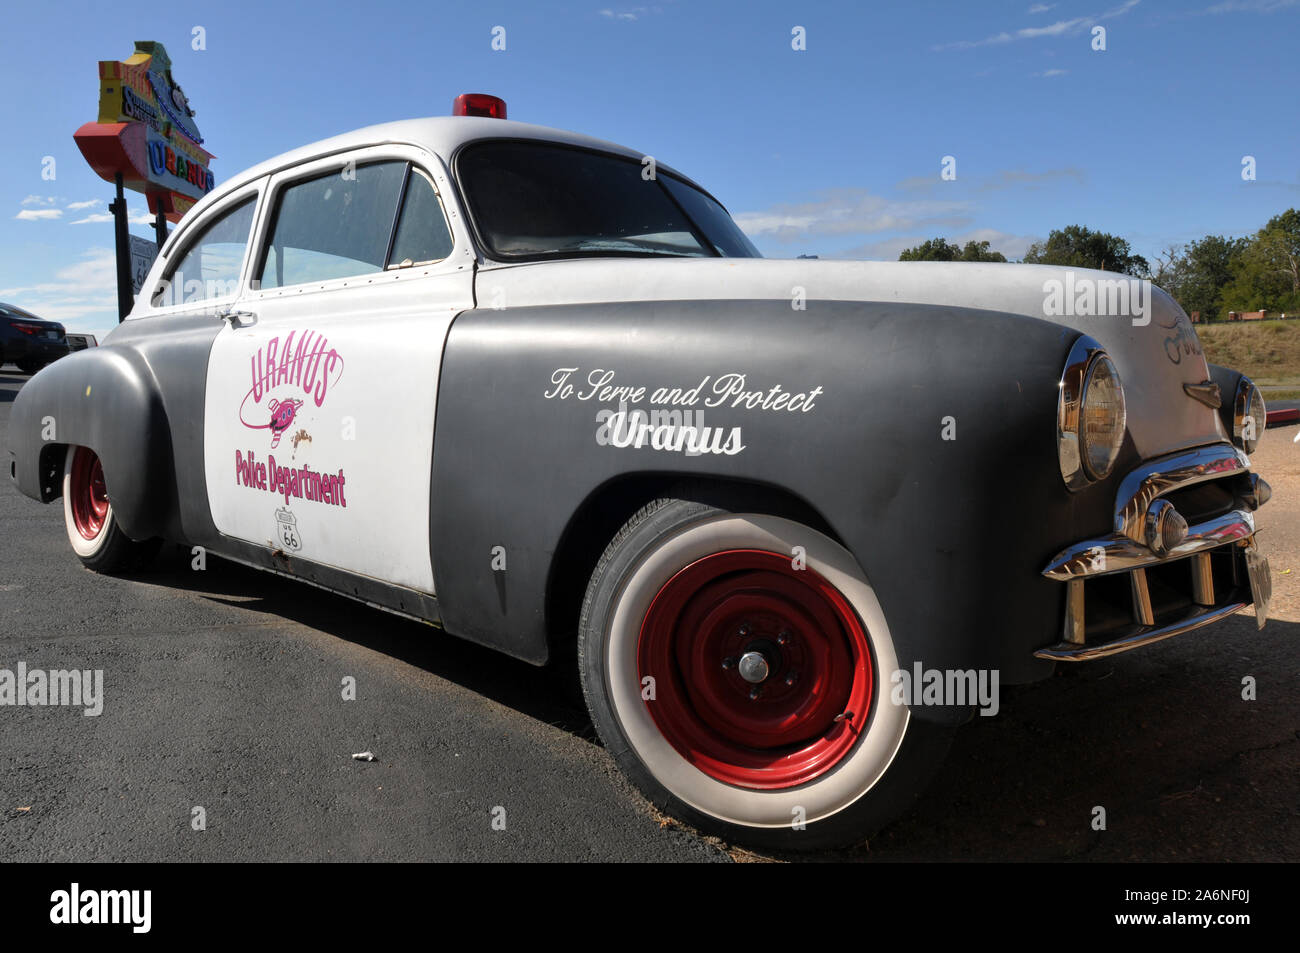 A classic car bearing the name of the Uranus Police Department is pictured at Uranus, Missouri, a quirky tourist attraction along old Route 66. Stock Photo